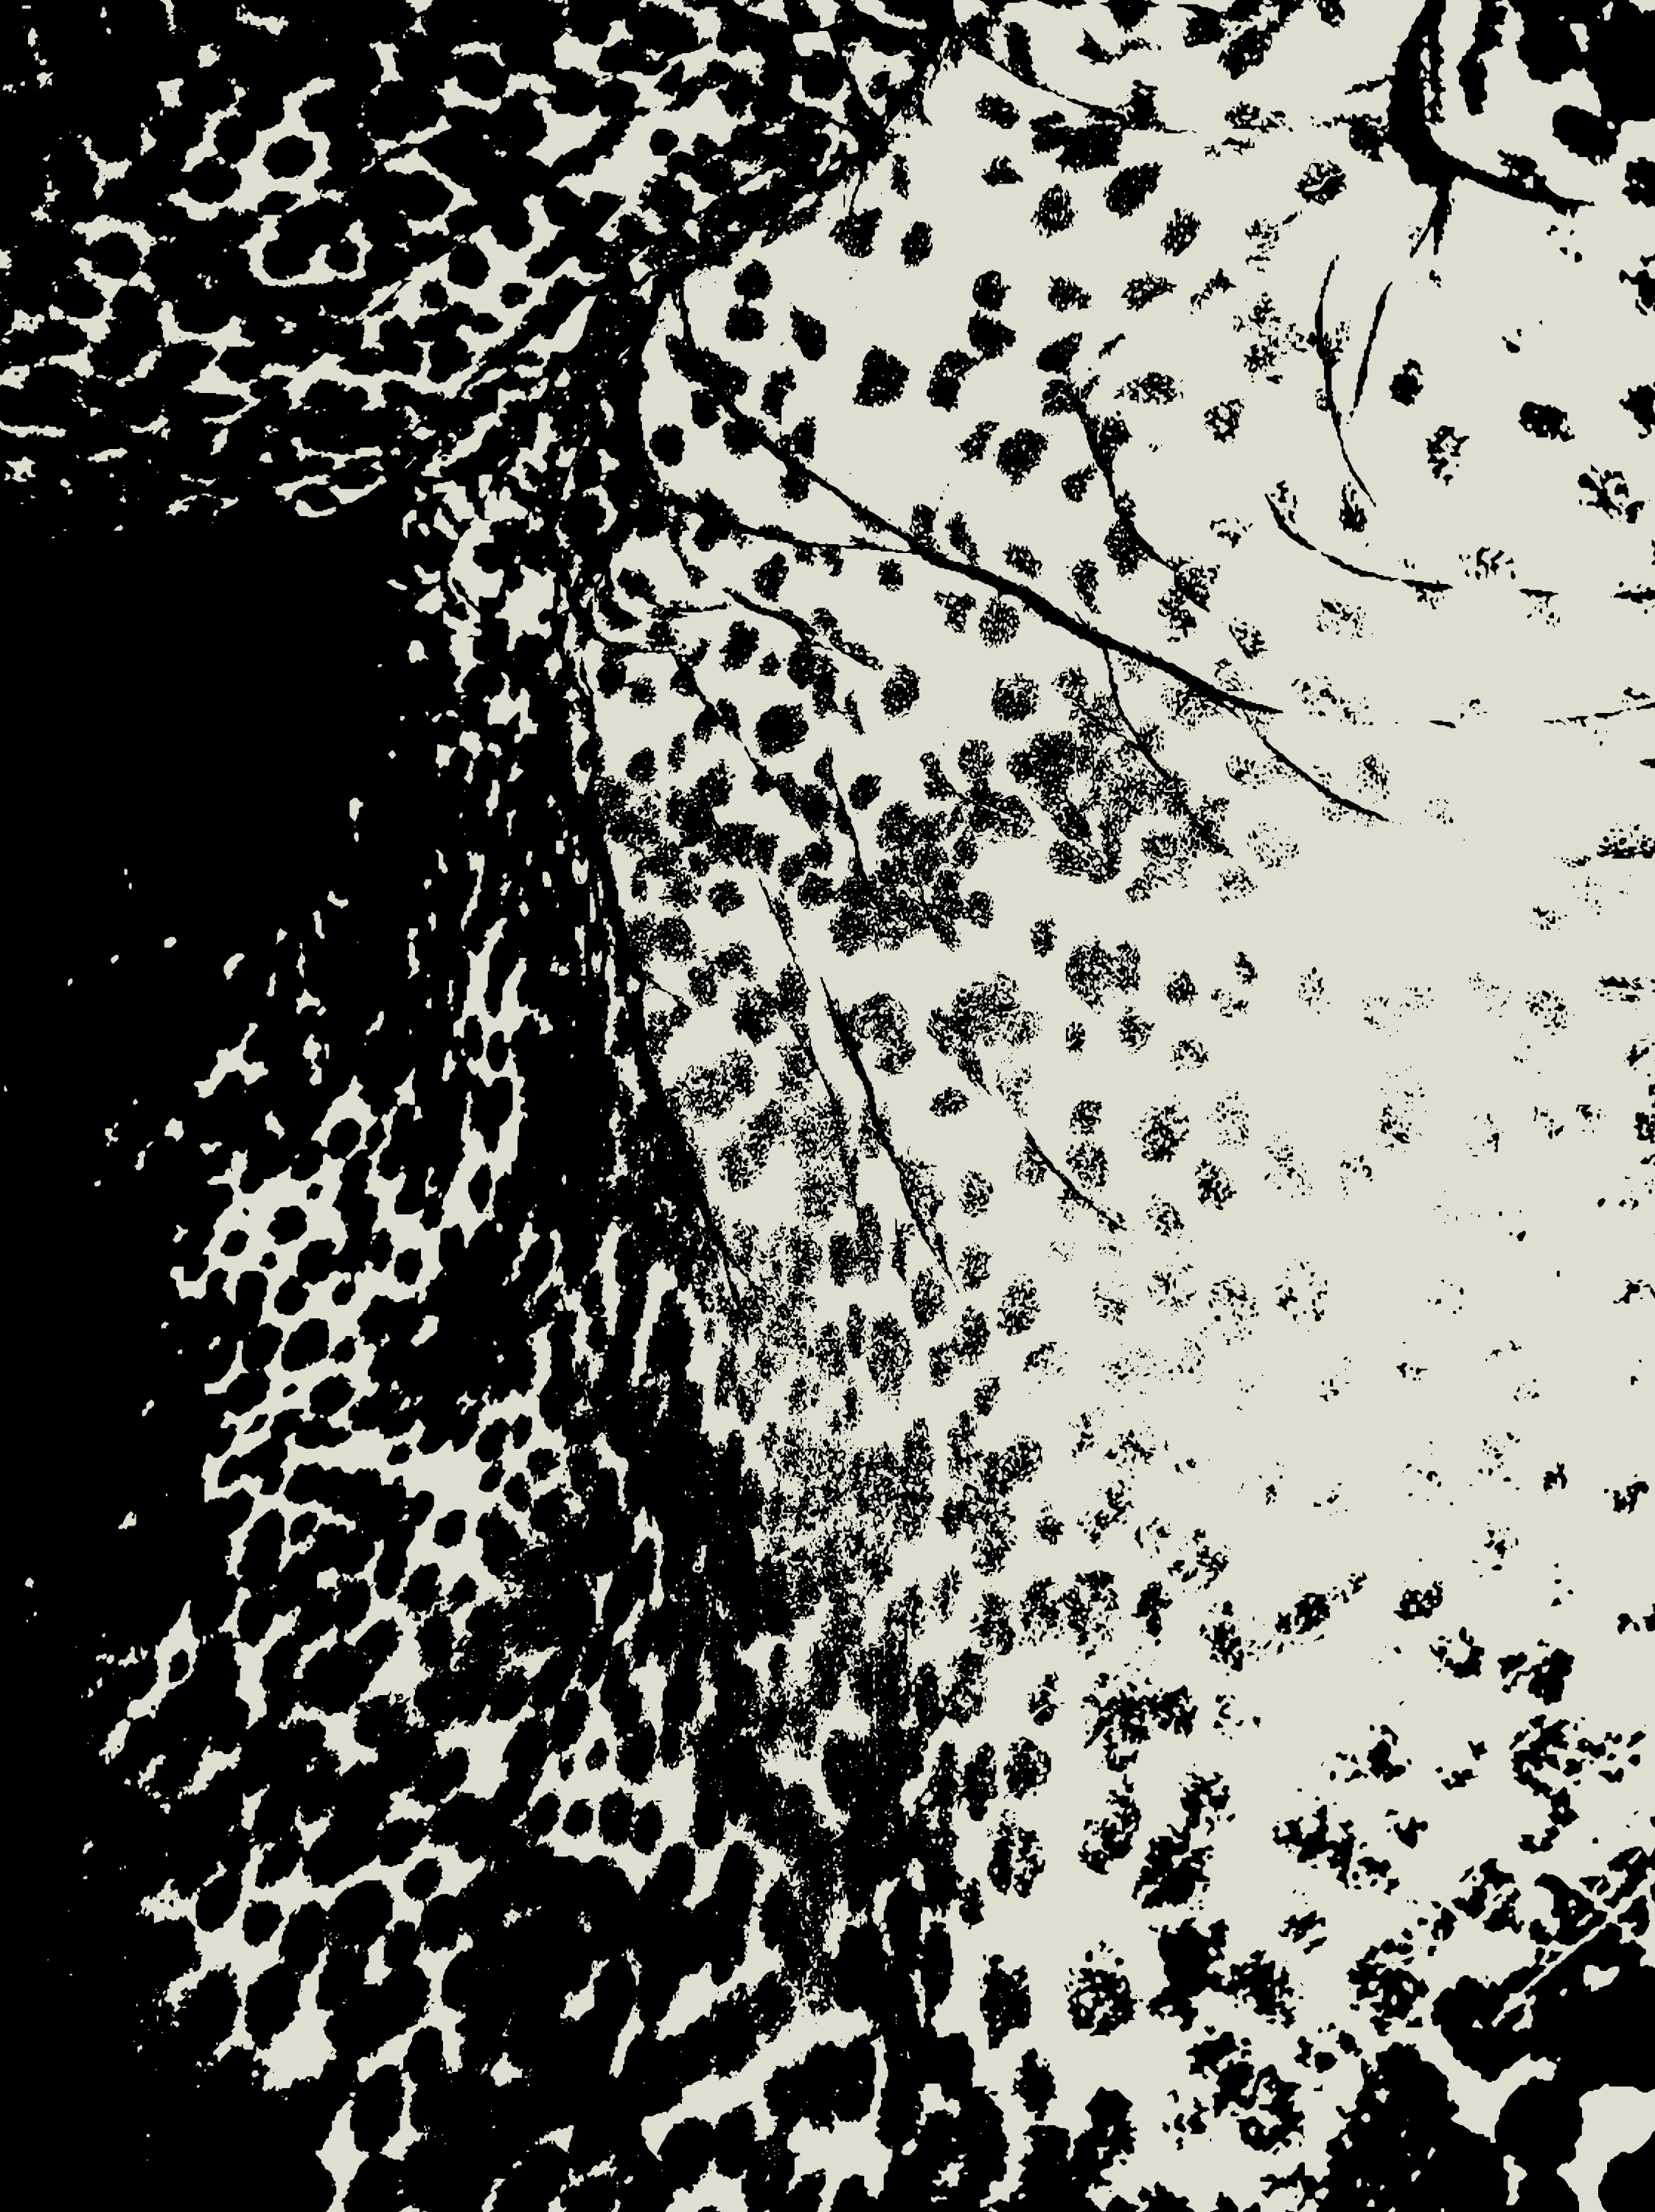 Graphic derived from the markings on an Indian elephant's ear. Speckles and dots in dark on light, the light areas being where pigmentation has been lost.